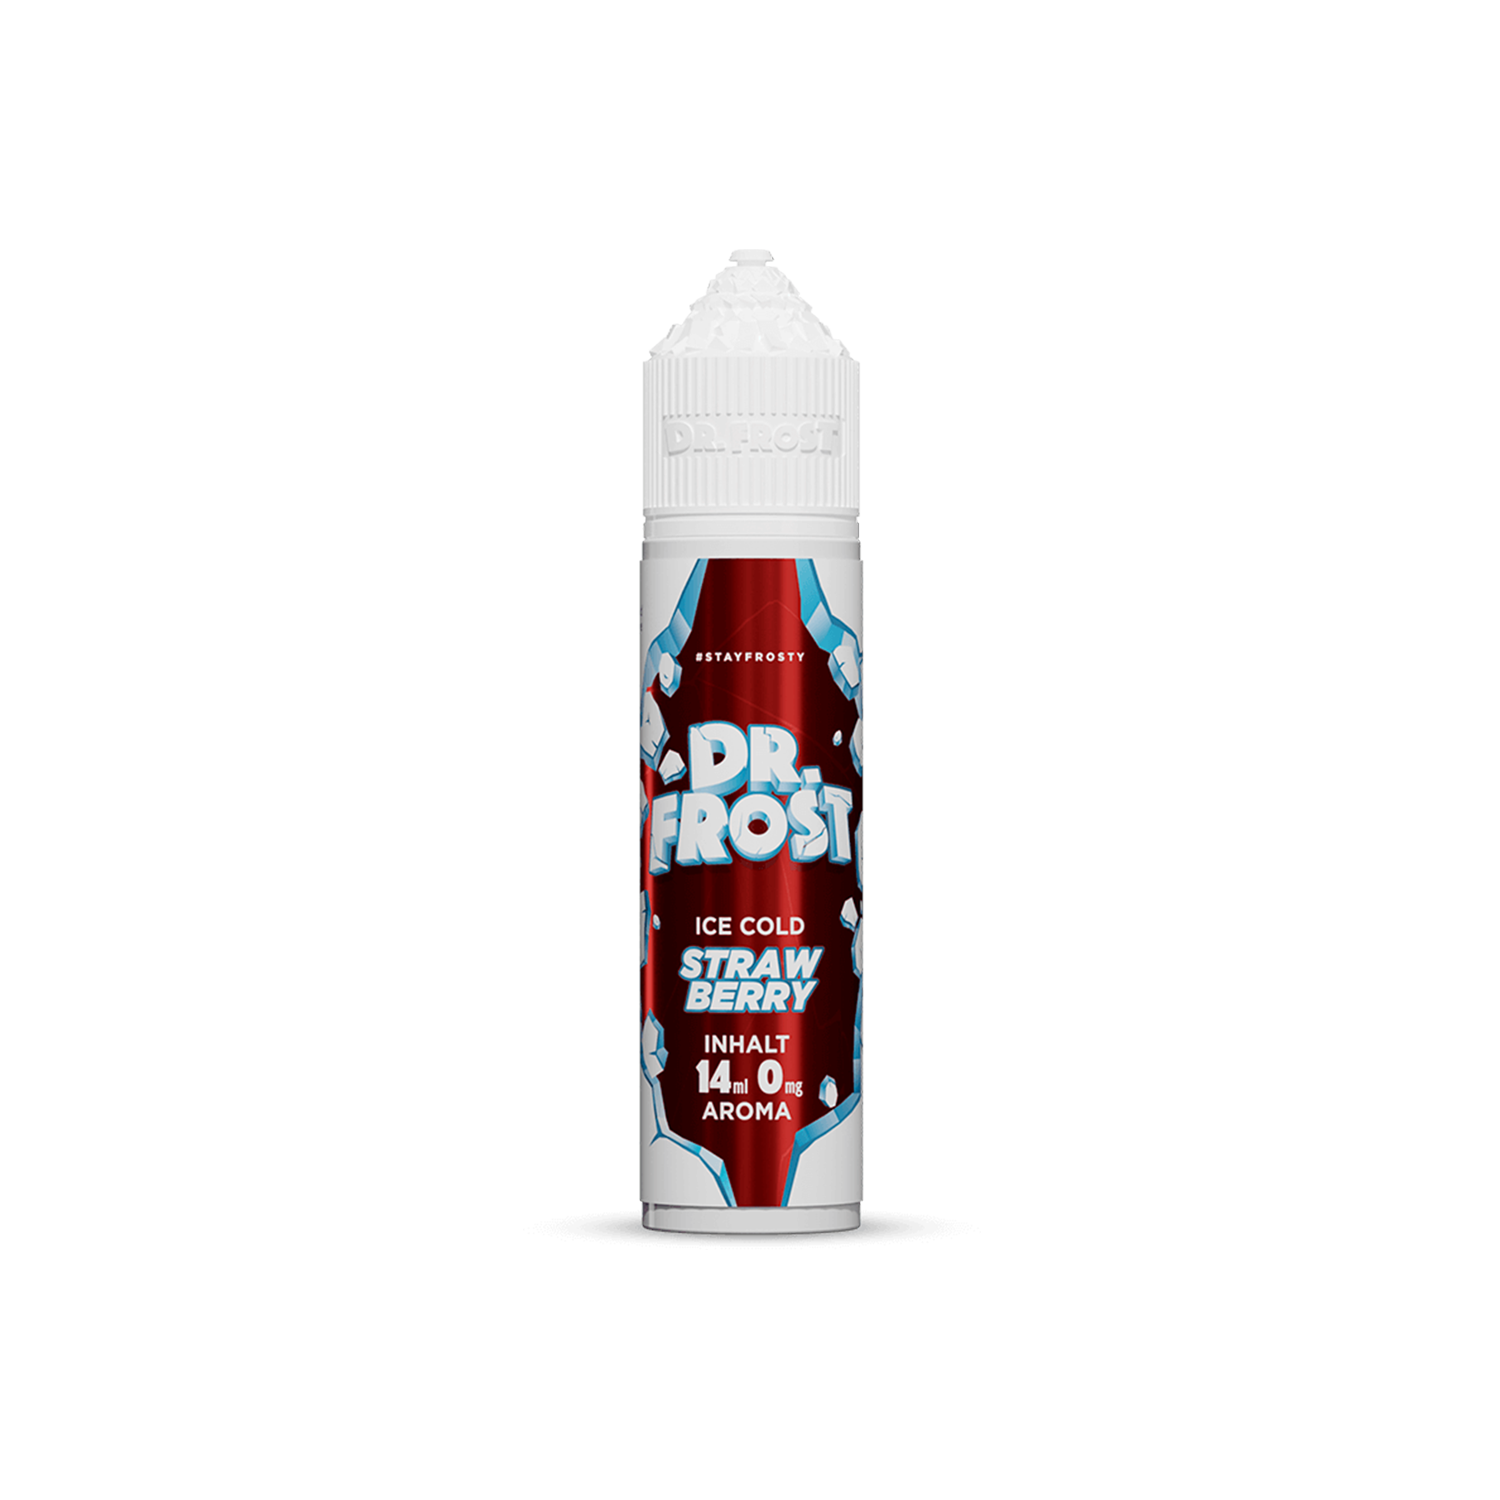 Dr. Frost - Ice Cold - Strawberry 14 ml Aroma